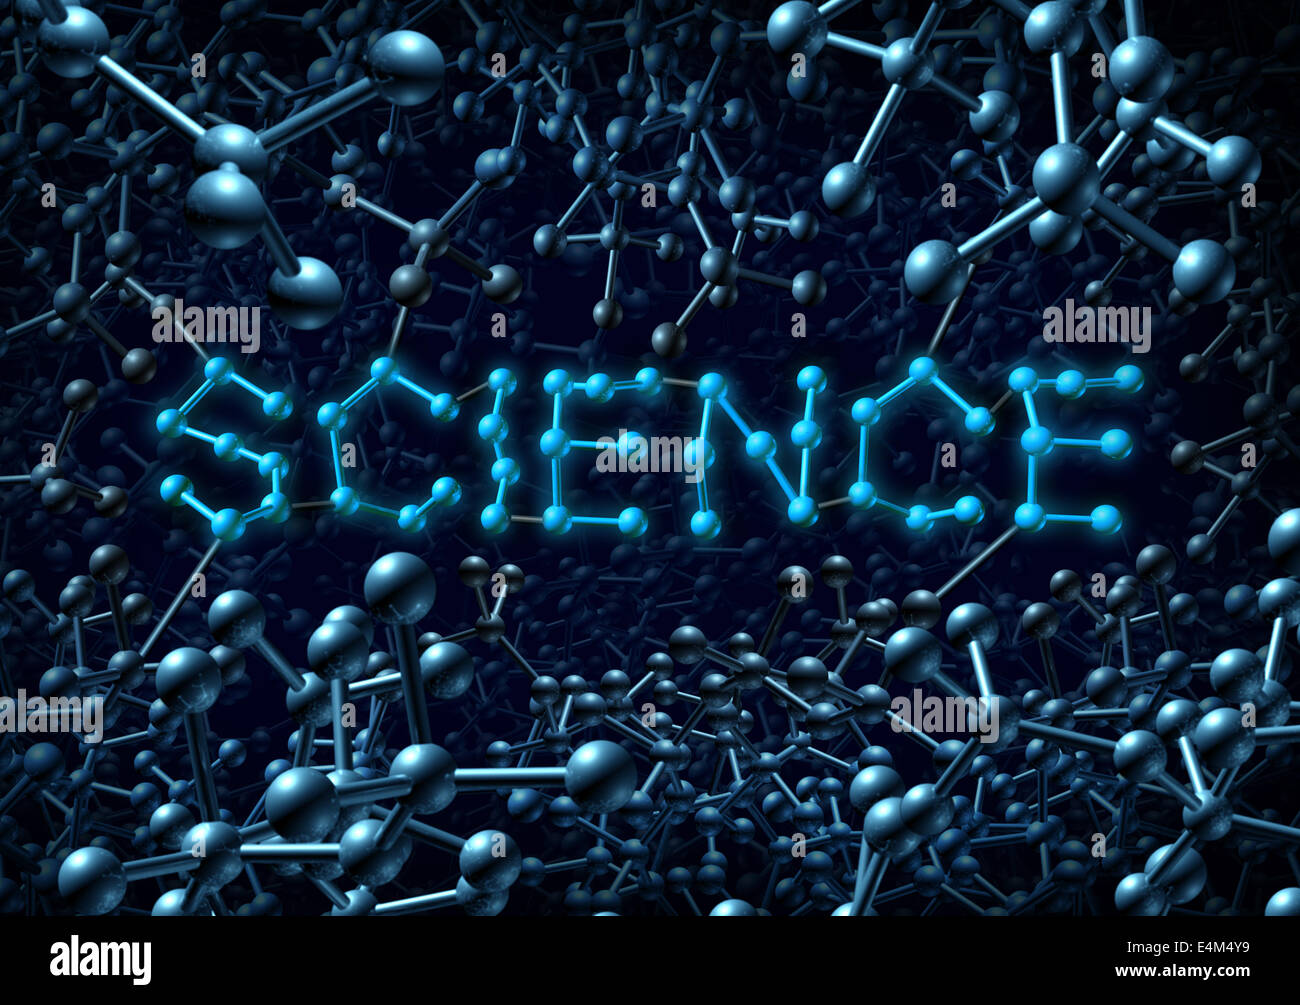 Science concept and chemistry symbol as a molecule group of three dimensional atoms shaped as text in a blue background connected together by chemical bonds as a molecular scientific symbol and education icon. Stock Photo